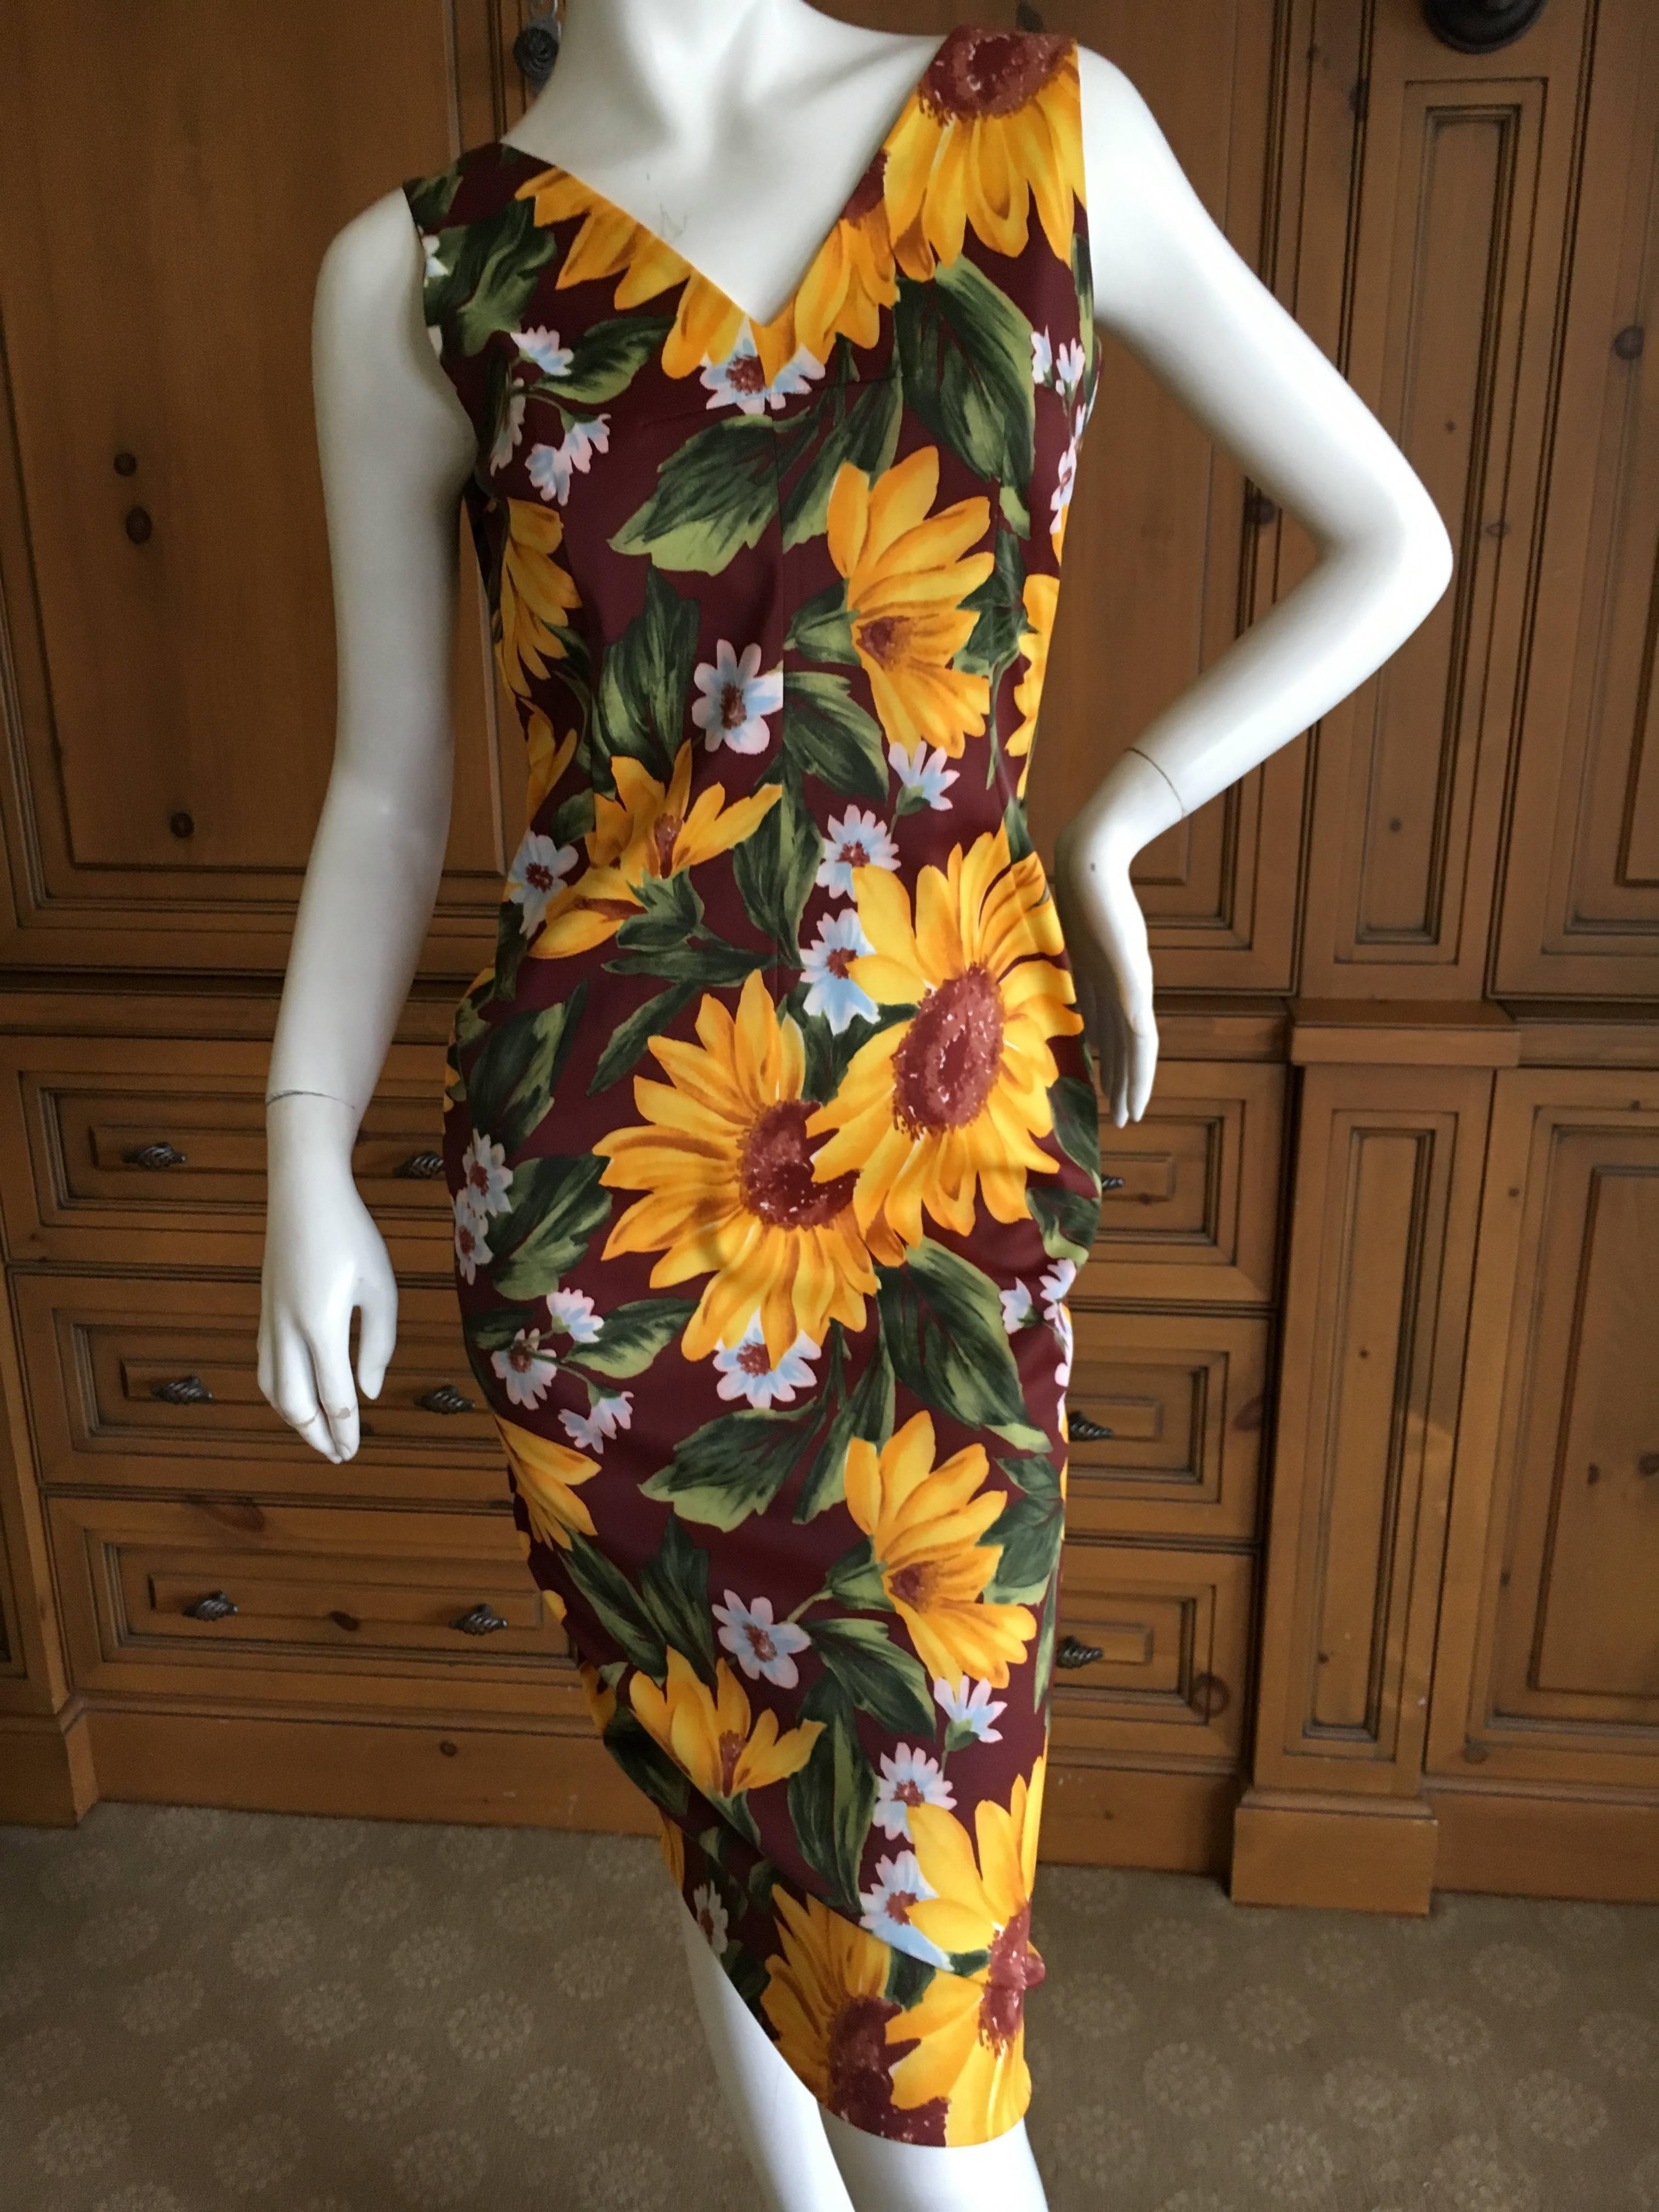 D&G Dolce & Gabbana Sunflower Dress .
Cut with a low back, this is so sweet.
Size 42
Bust 38